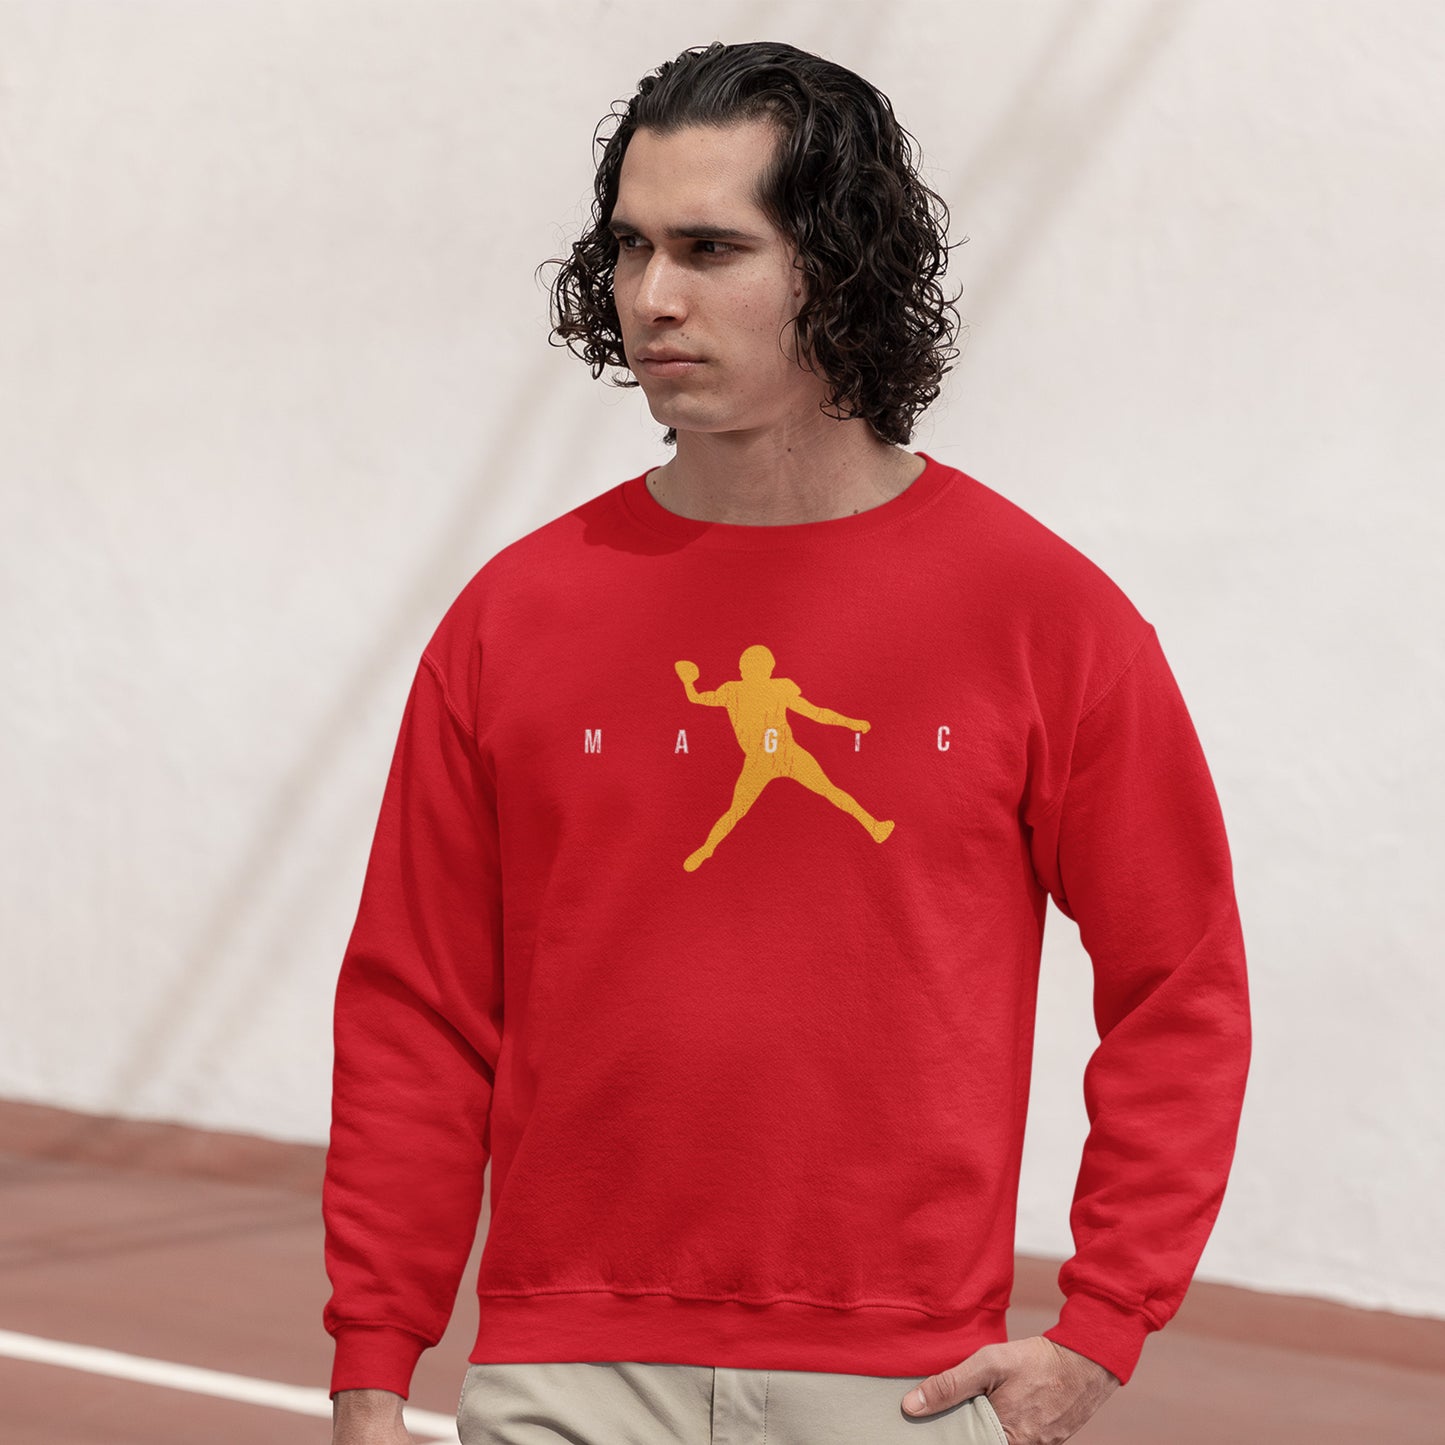 KC Swag Kansas City Chiefs Distressed White & Gold Magic Air Mahomie on a Red Crewneck Sweatshirt worn by a long-haired male model walking through an outdoor basketball court